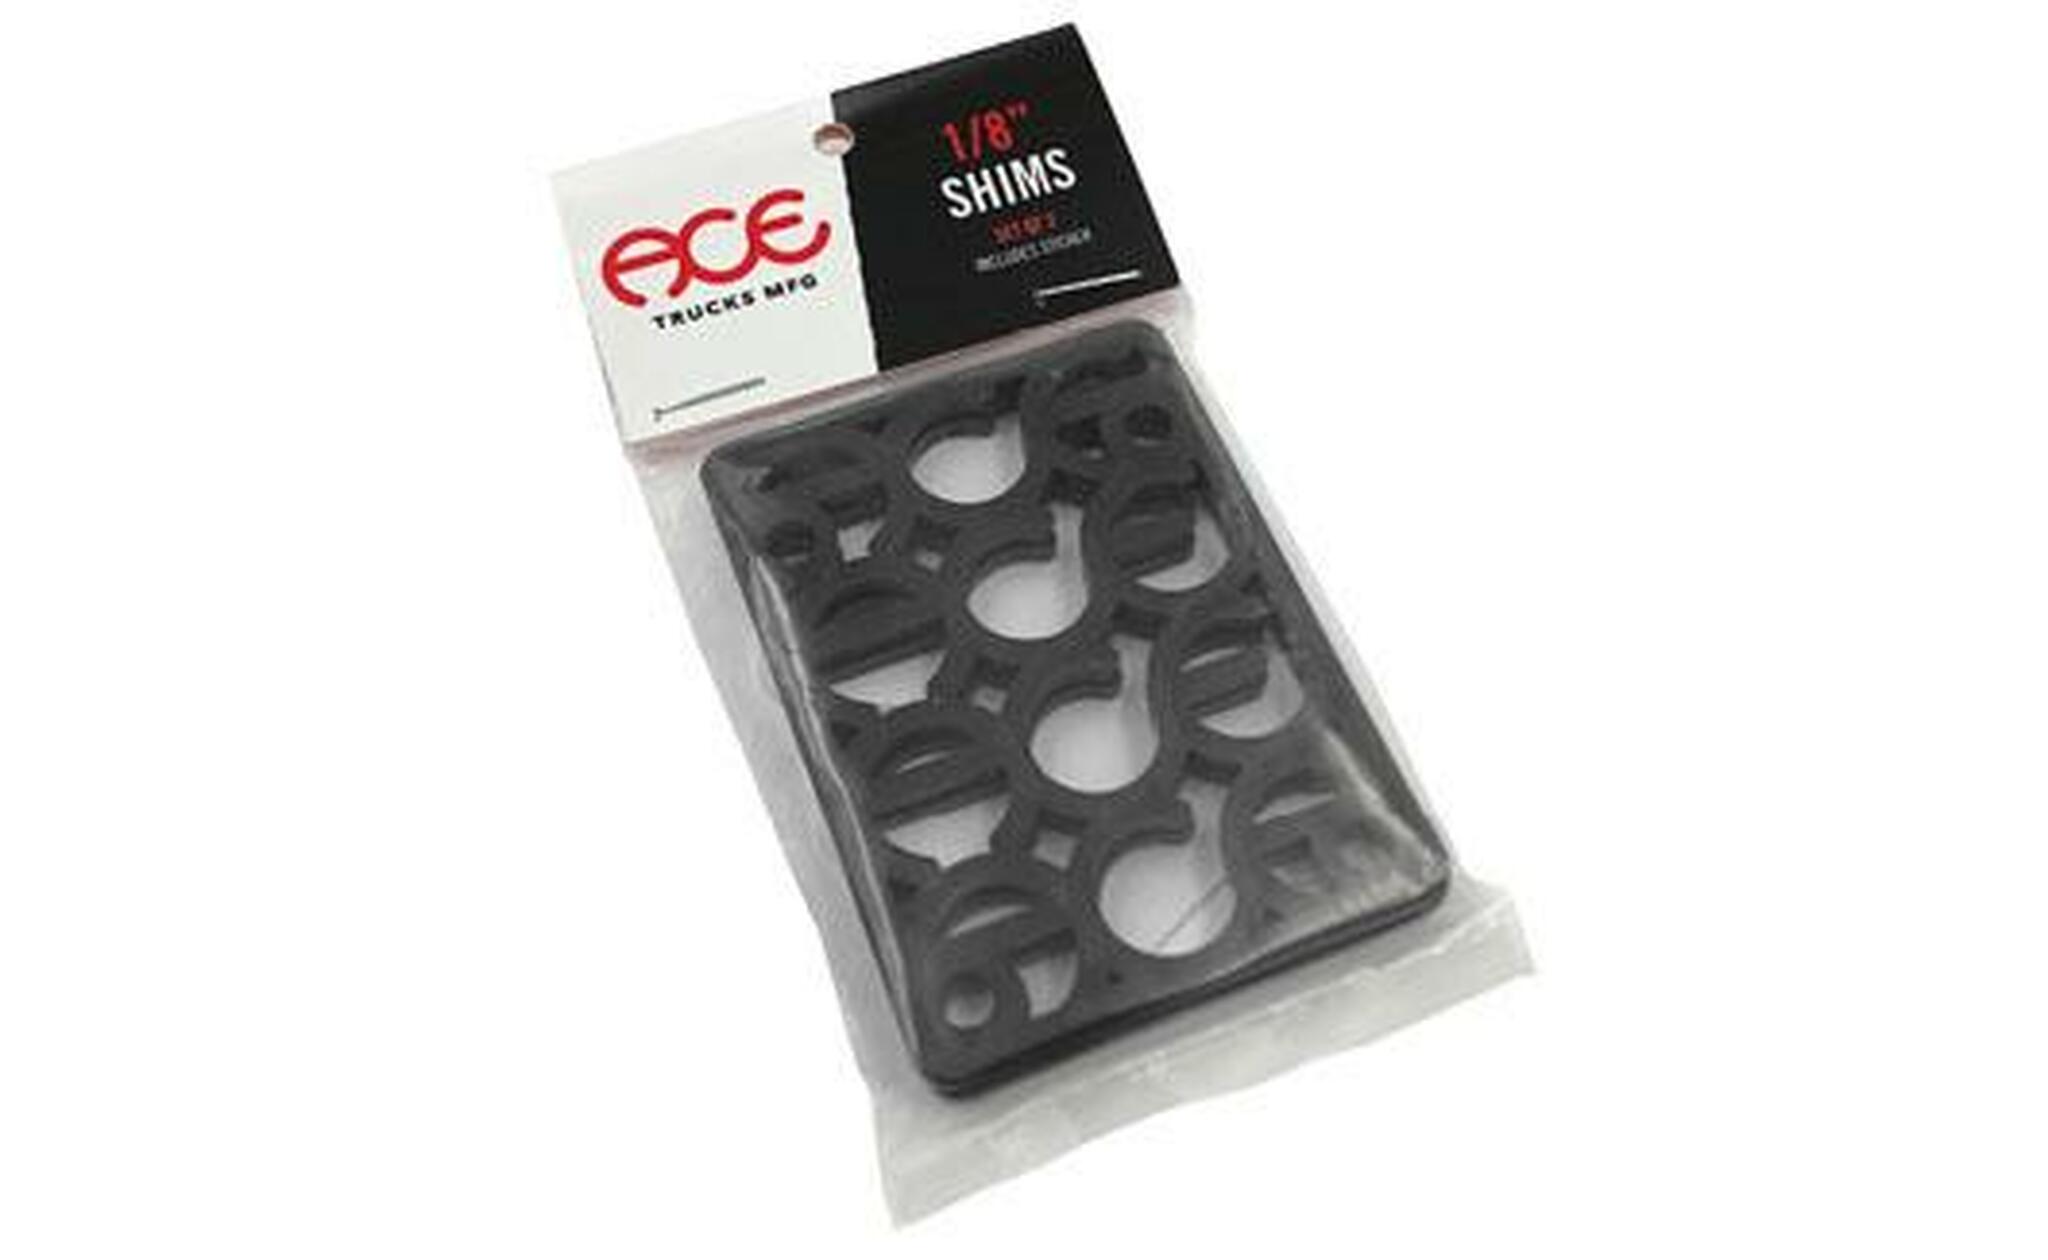 Ace Shims Riser Pads 1/8" - Invisible Board Shop